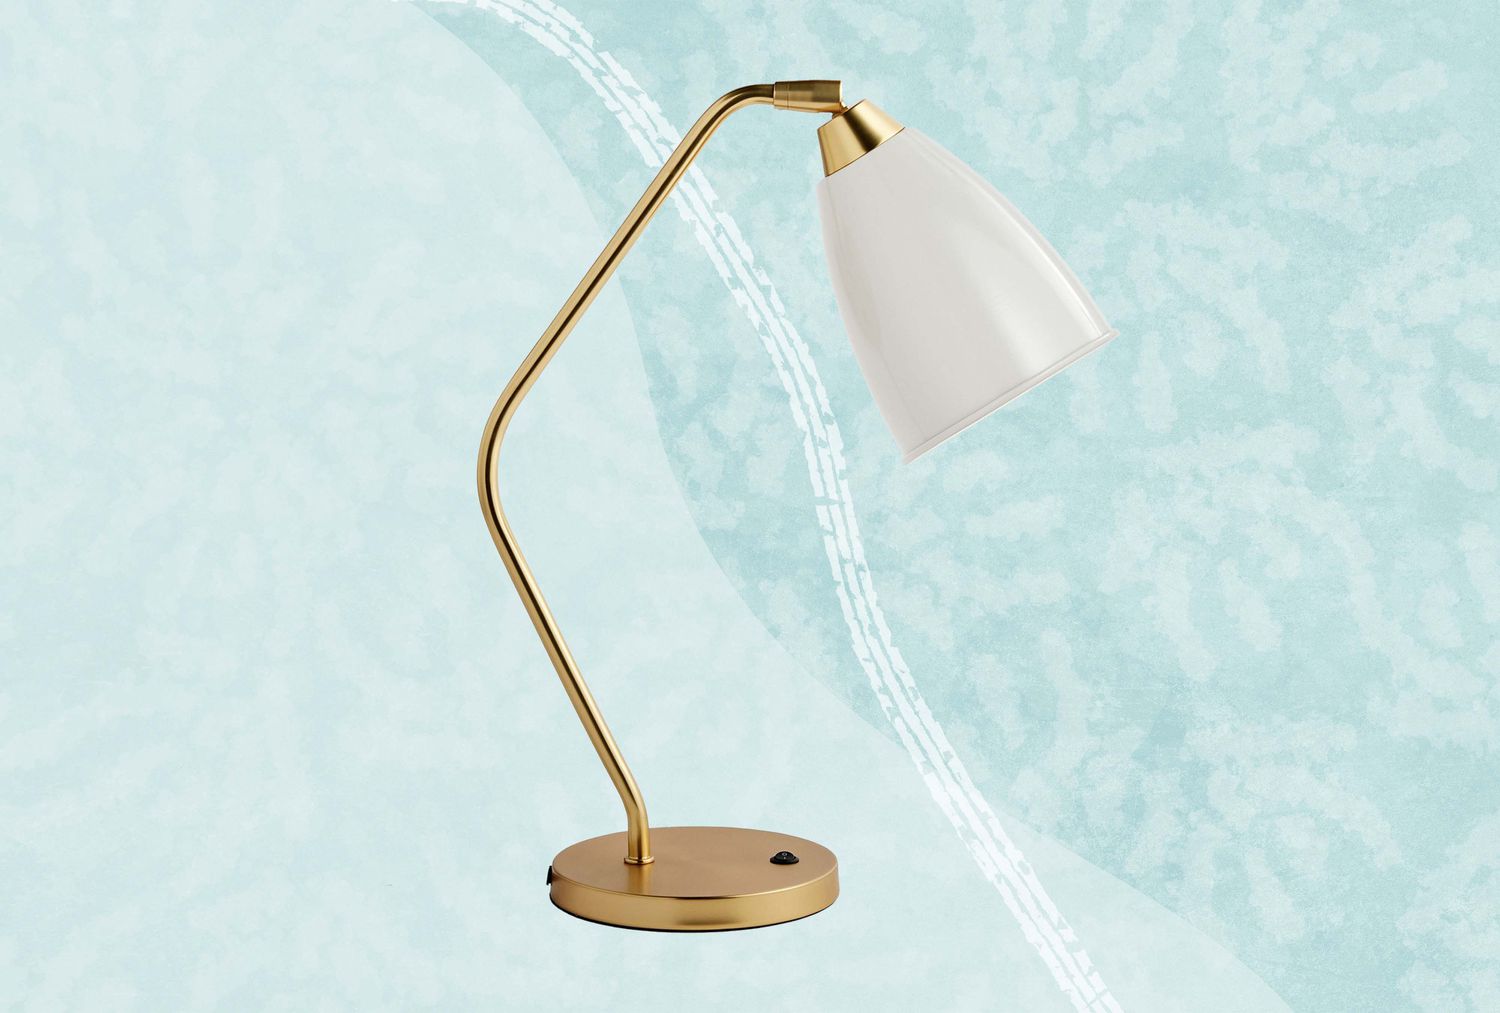 How To Repaint Brass Lamp